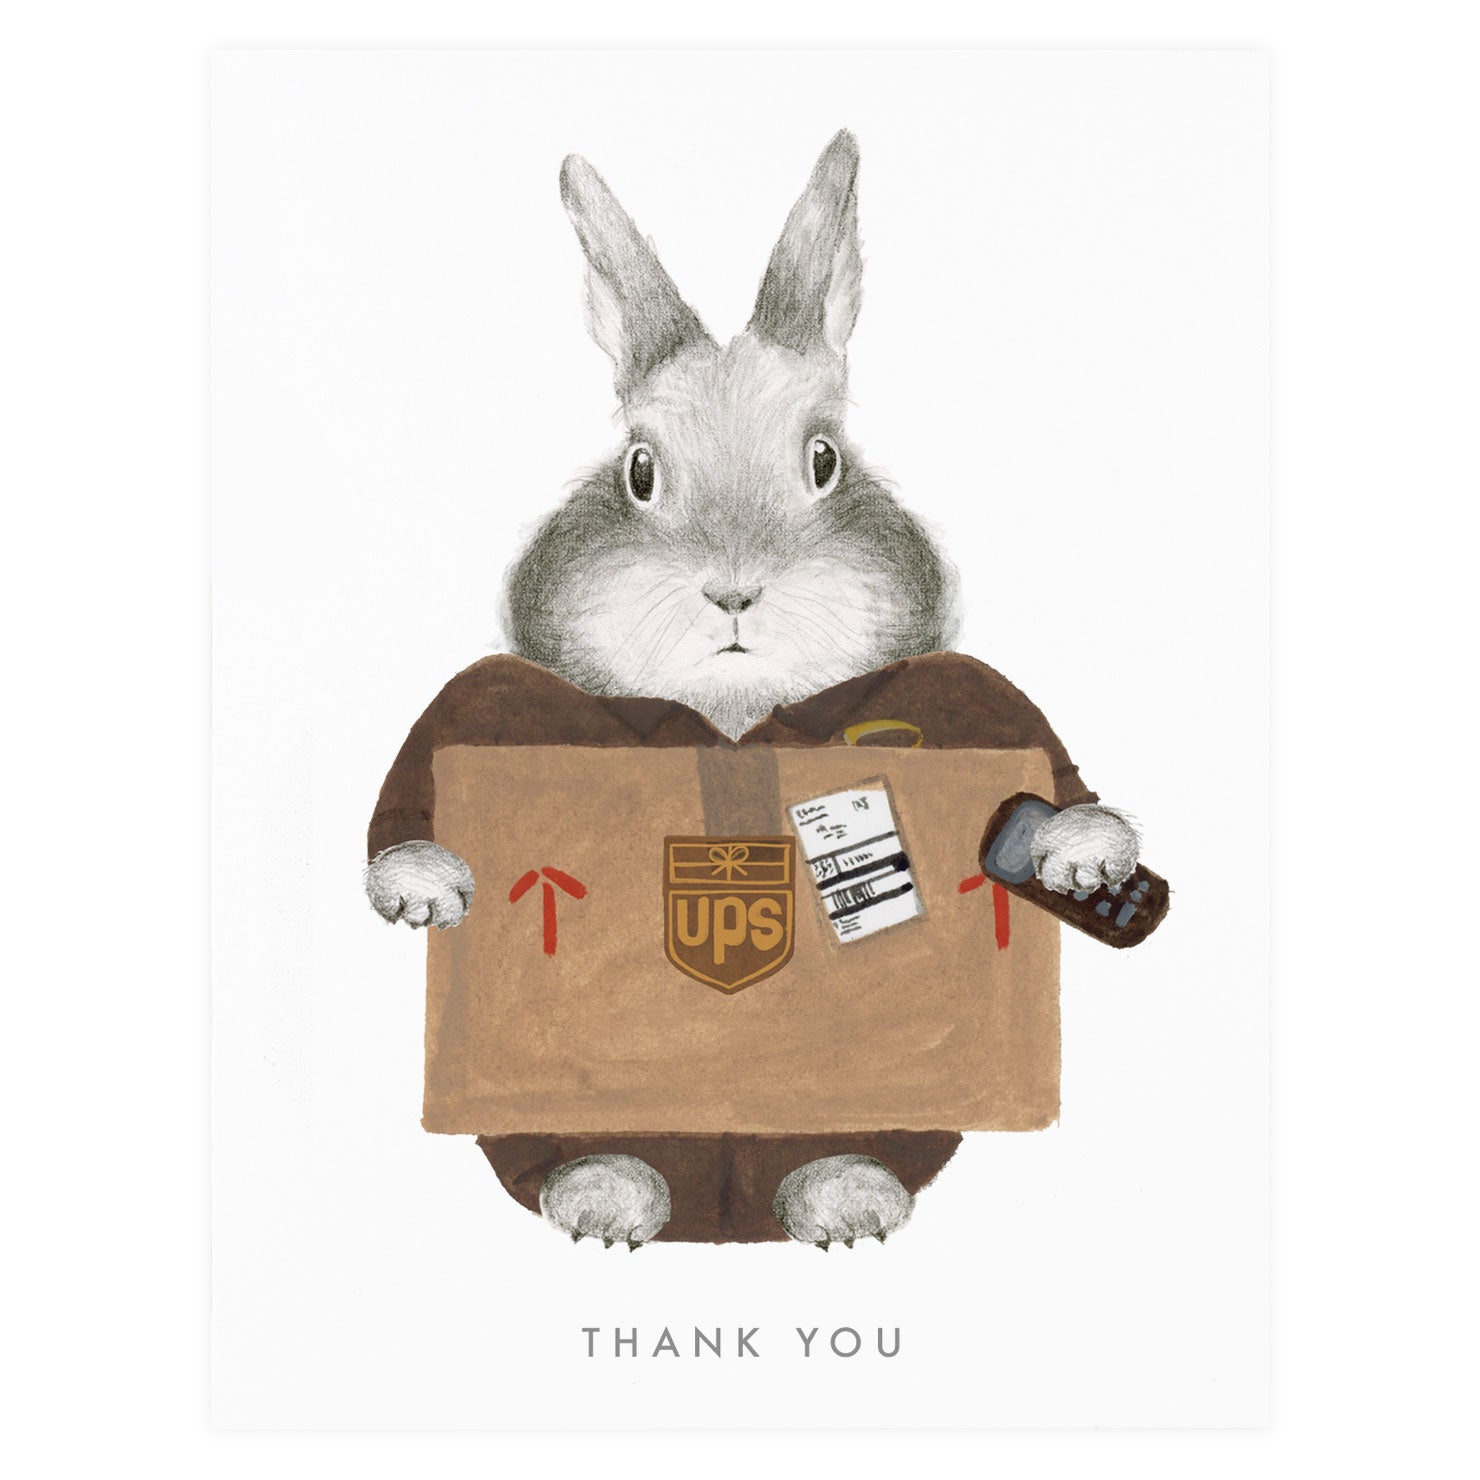 Essential Worker UPS Thank You Card